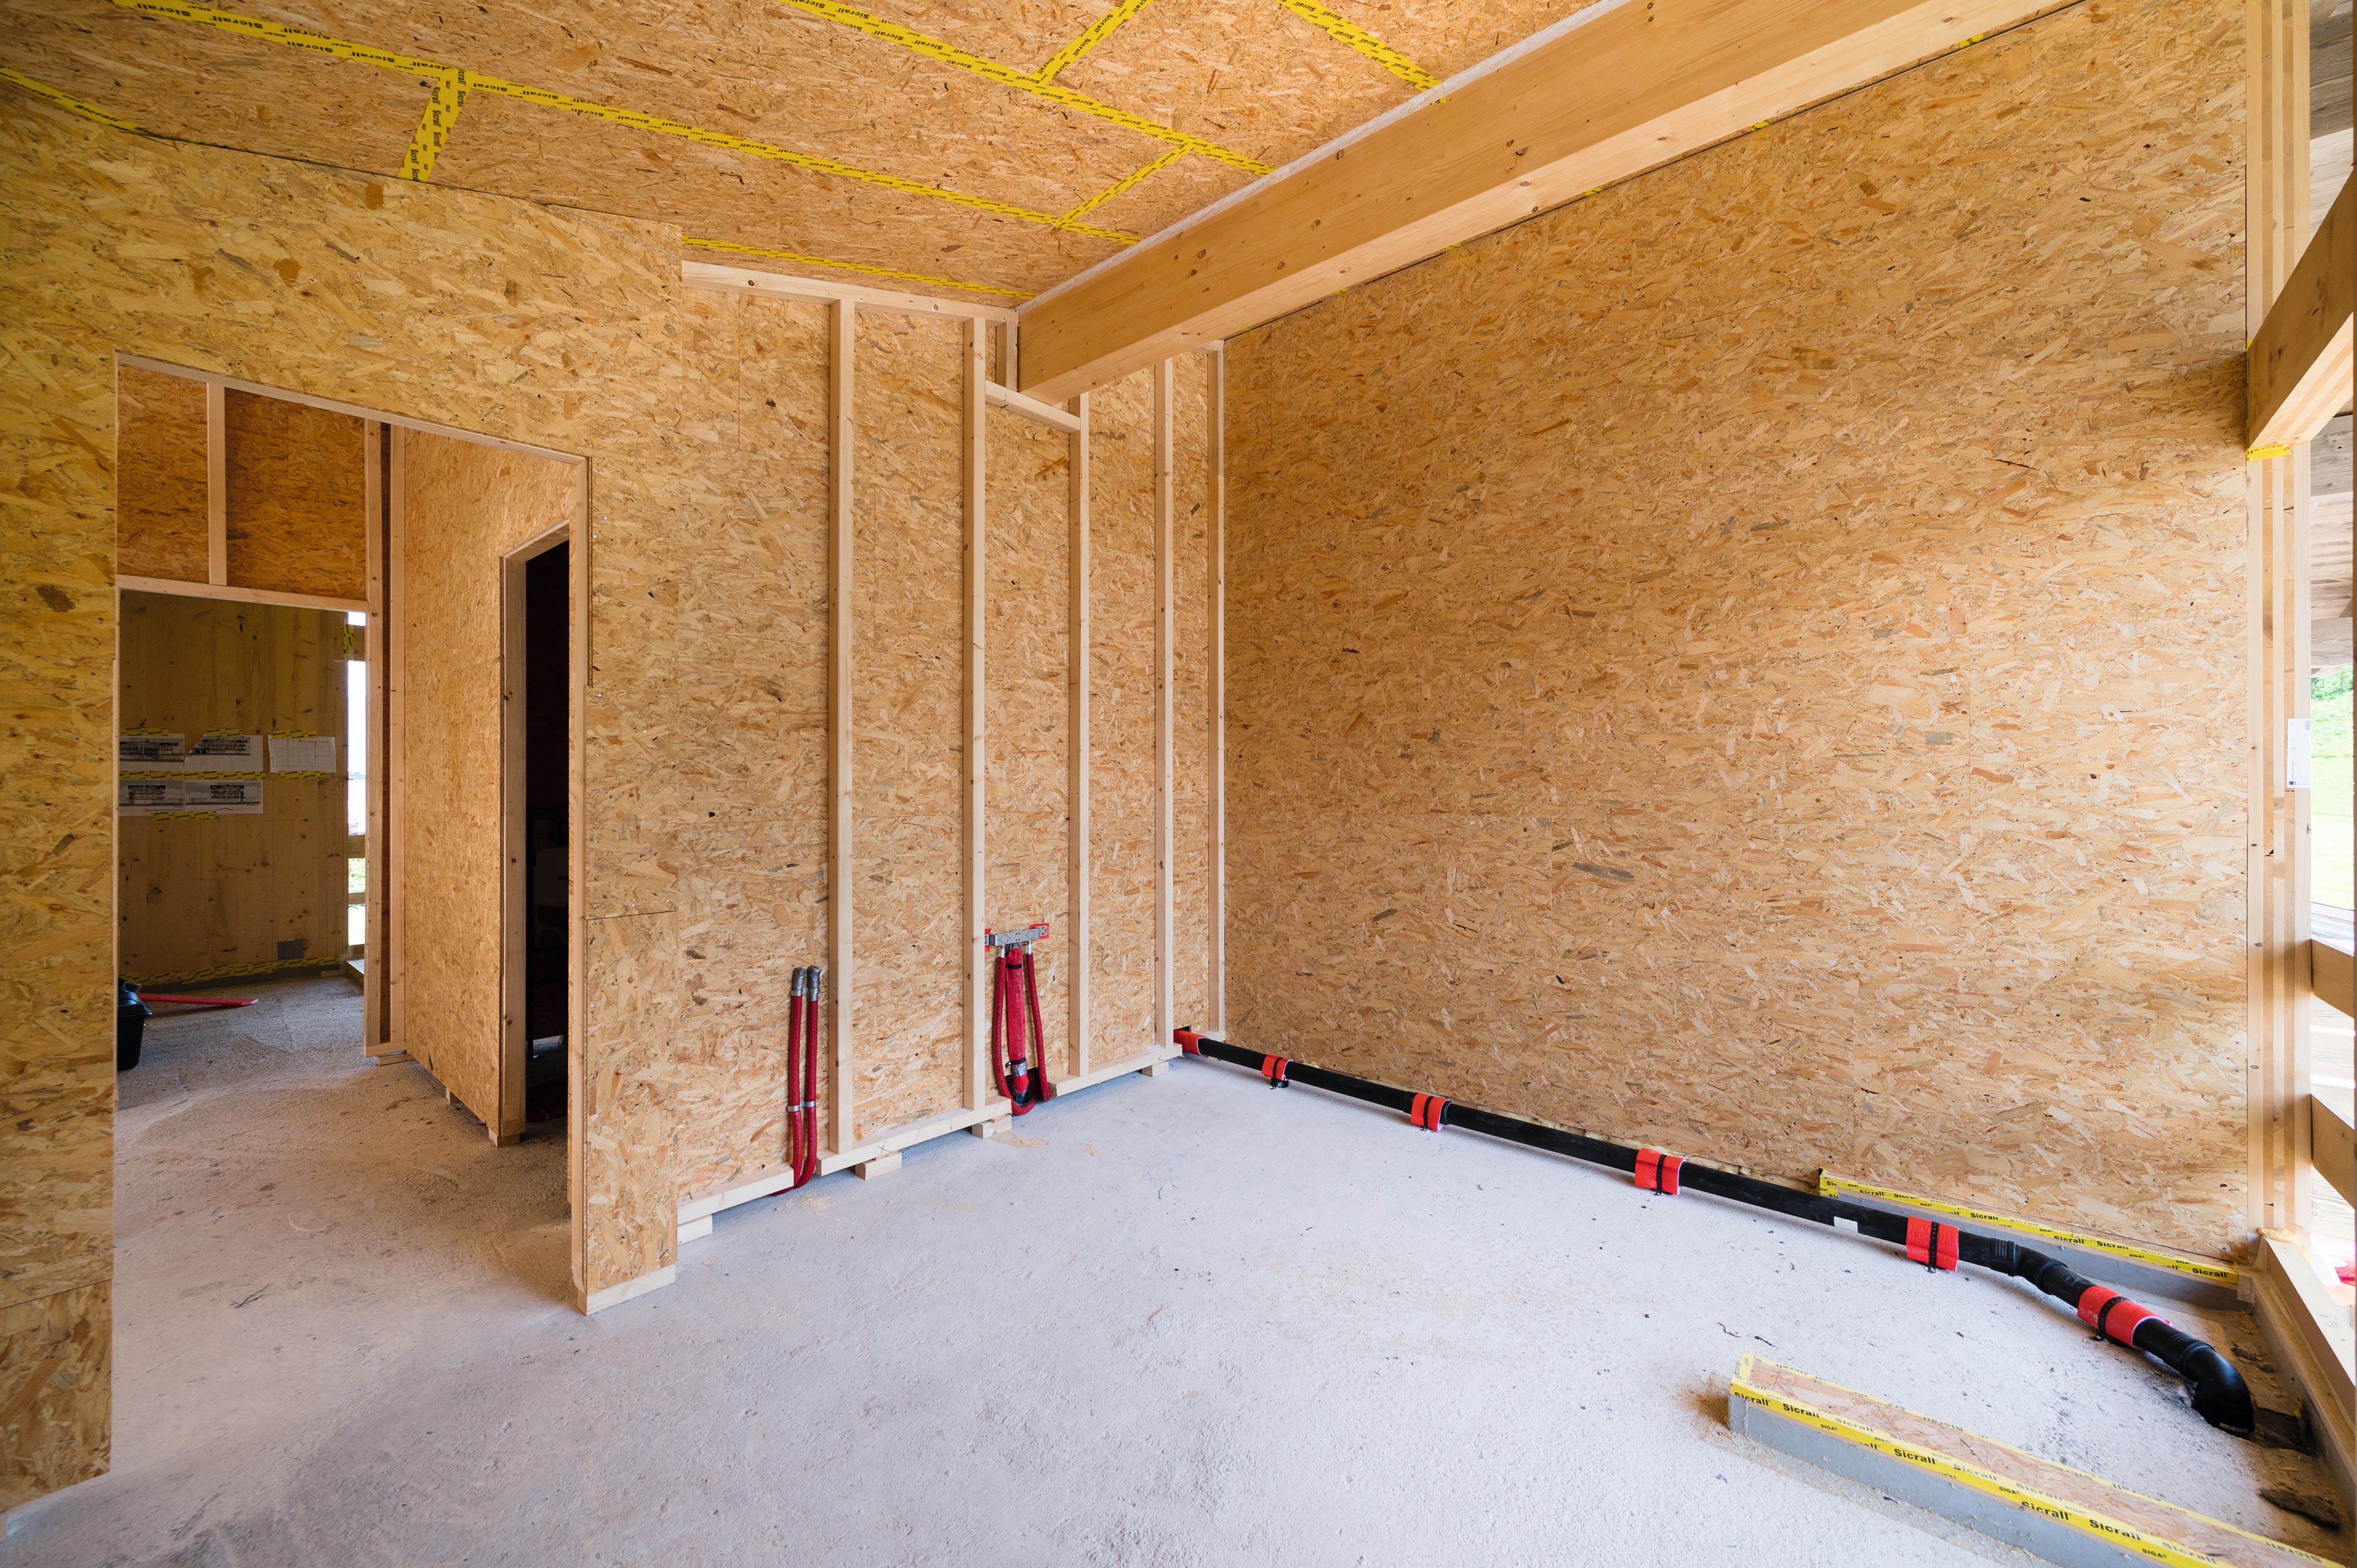 EGGER OSB 4 TOP flooring boards were used for the planking of the interior wall and the ceiling.